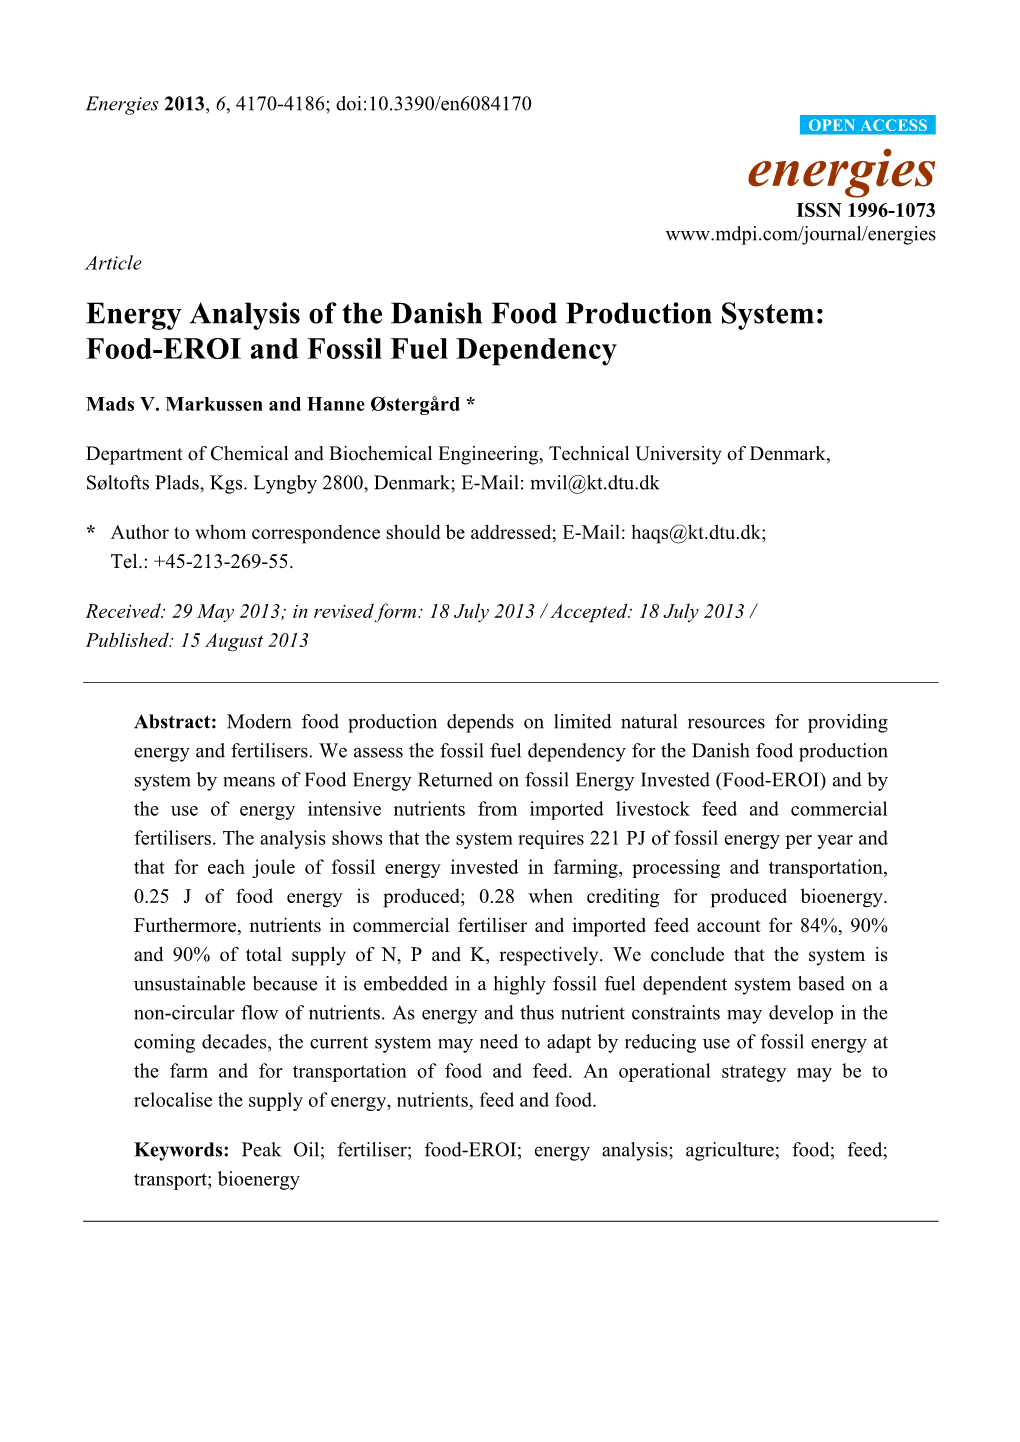 Energy Analysis of the Danish Food Production System: Food-EROI and Fossil Fuel Dependency